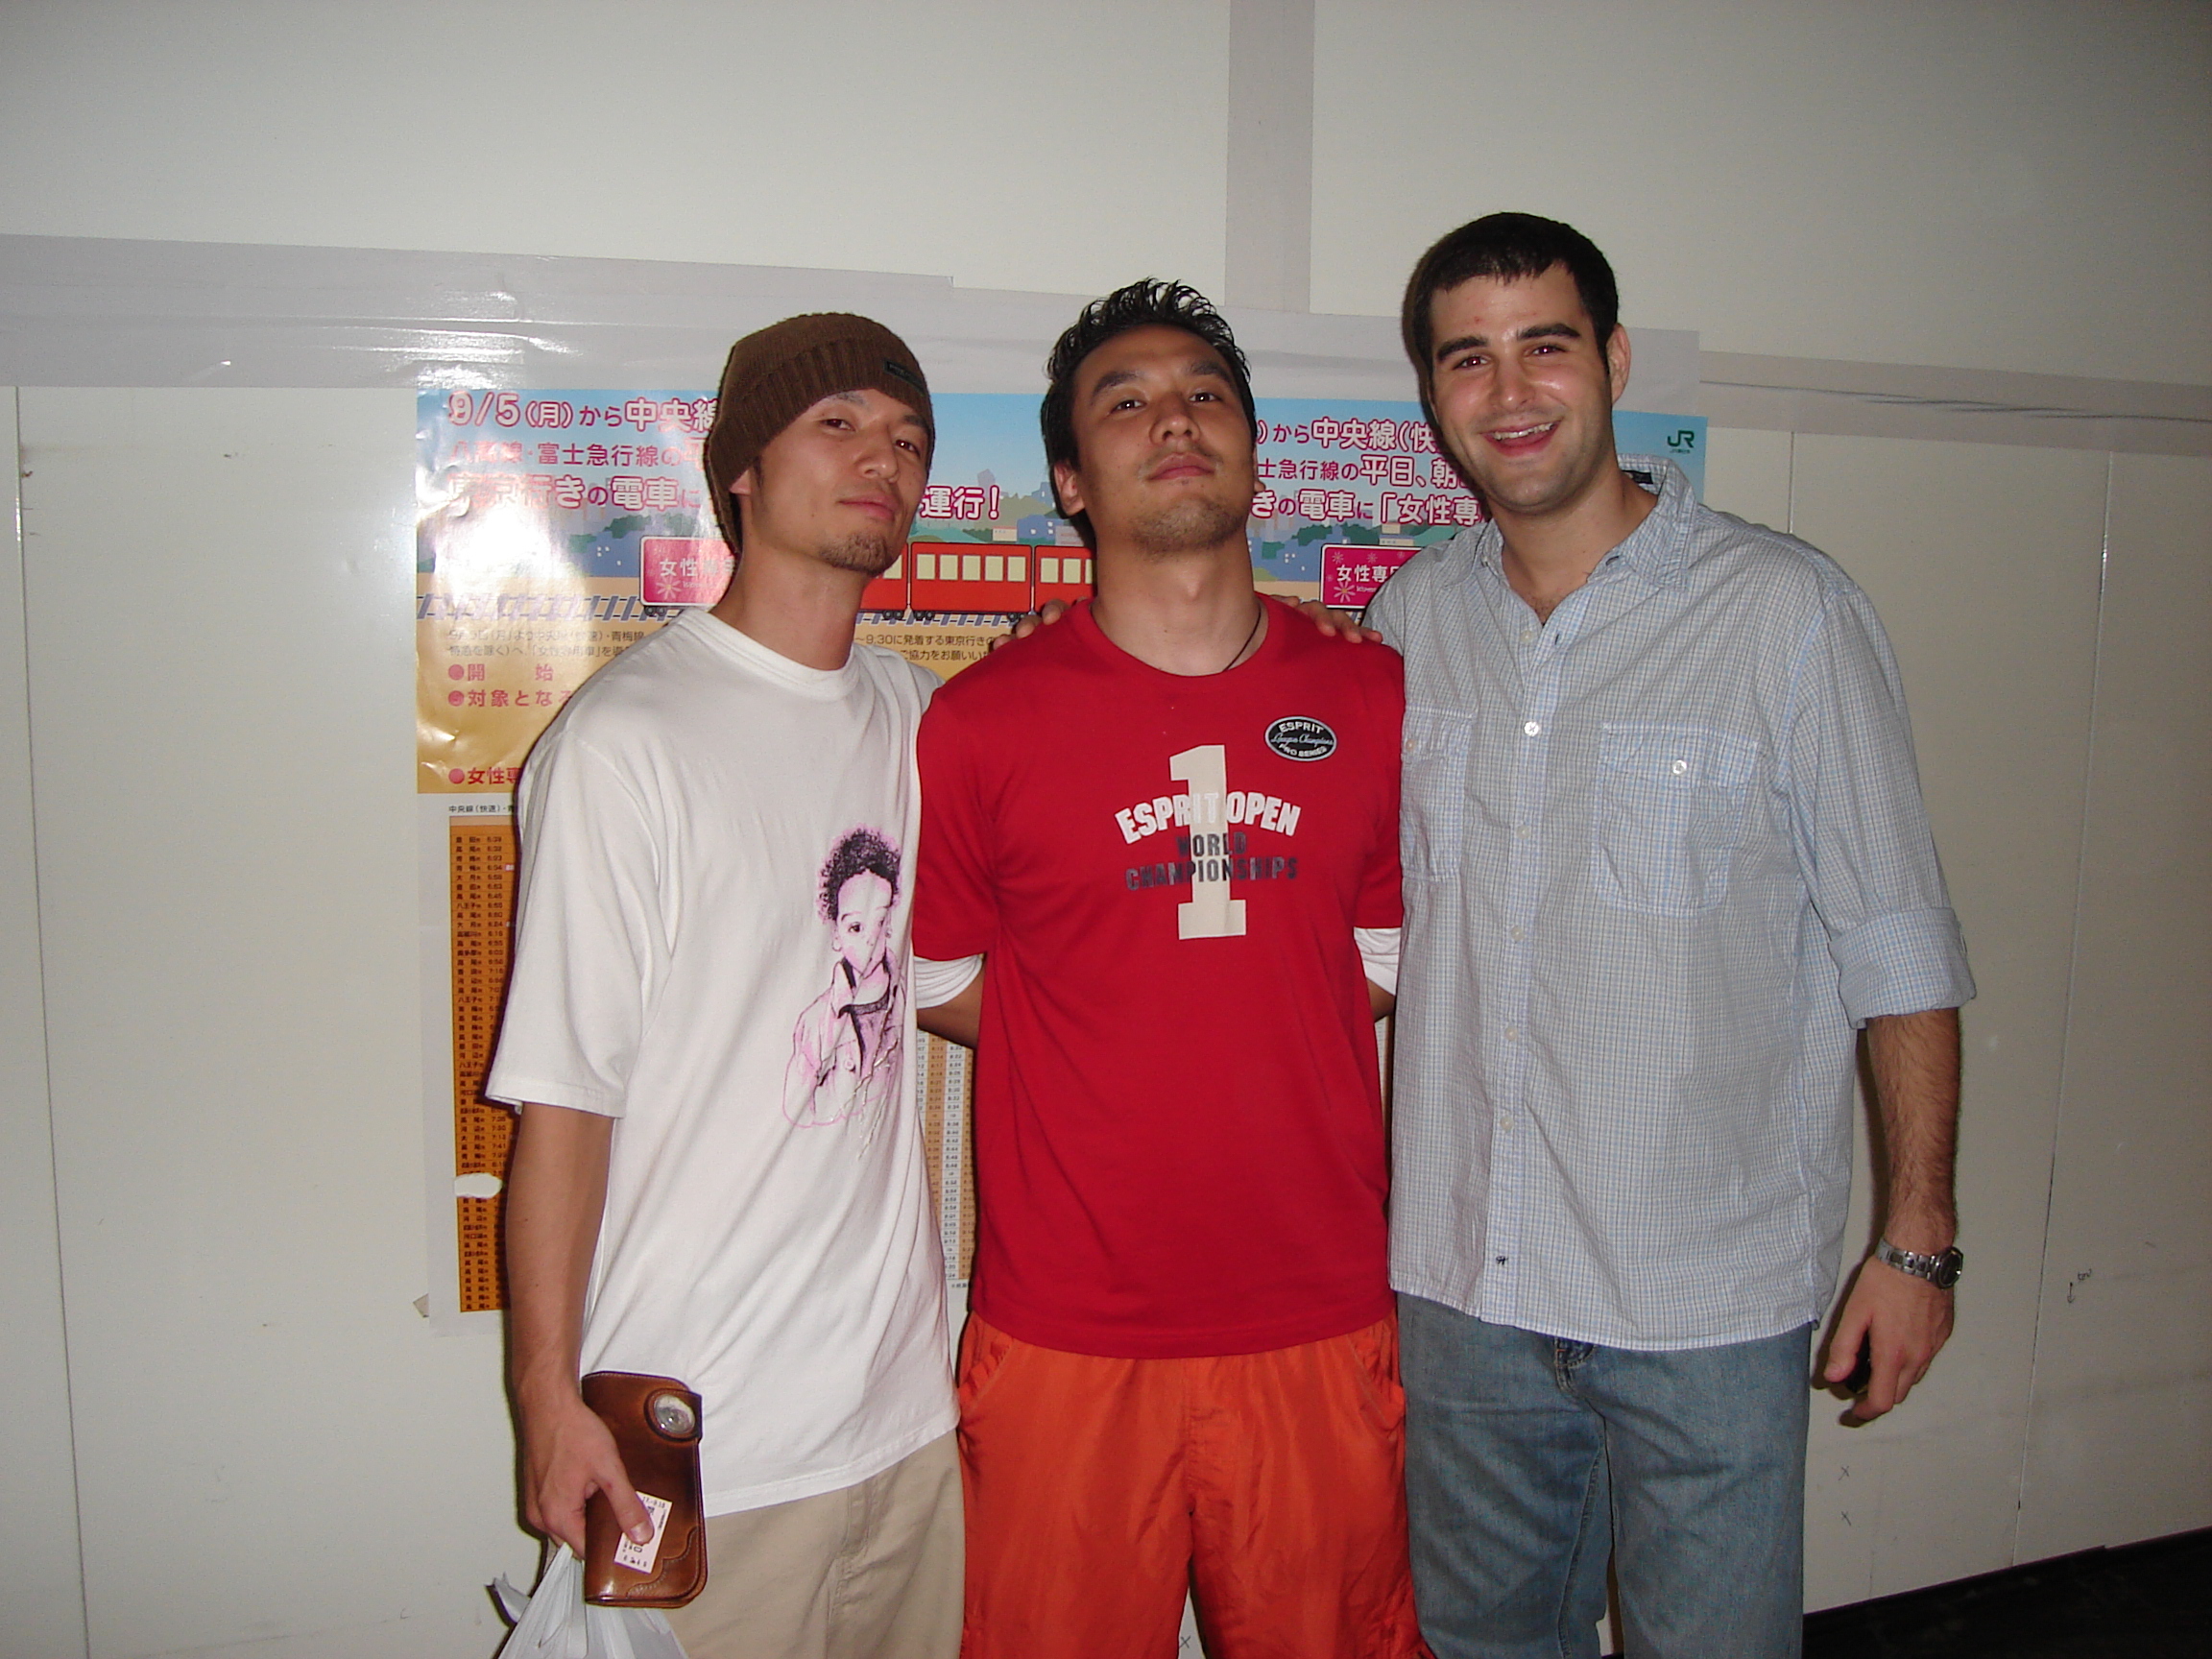 two japanese men and a caucasian man pose together